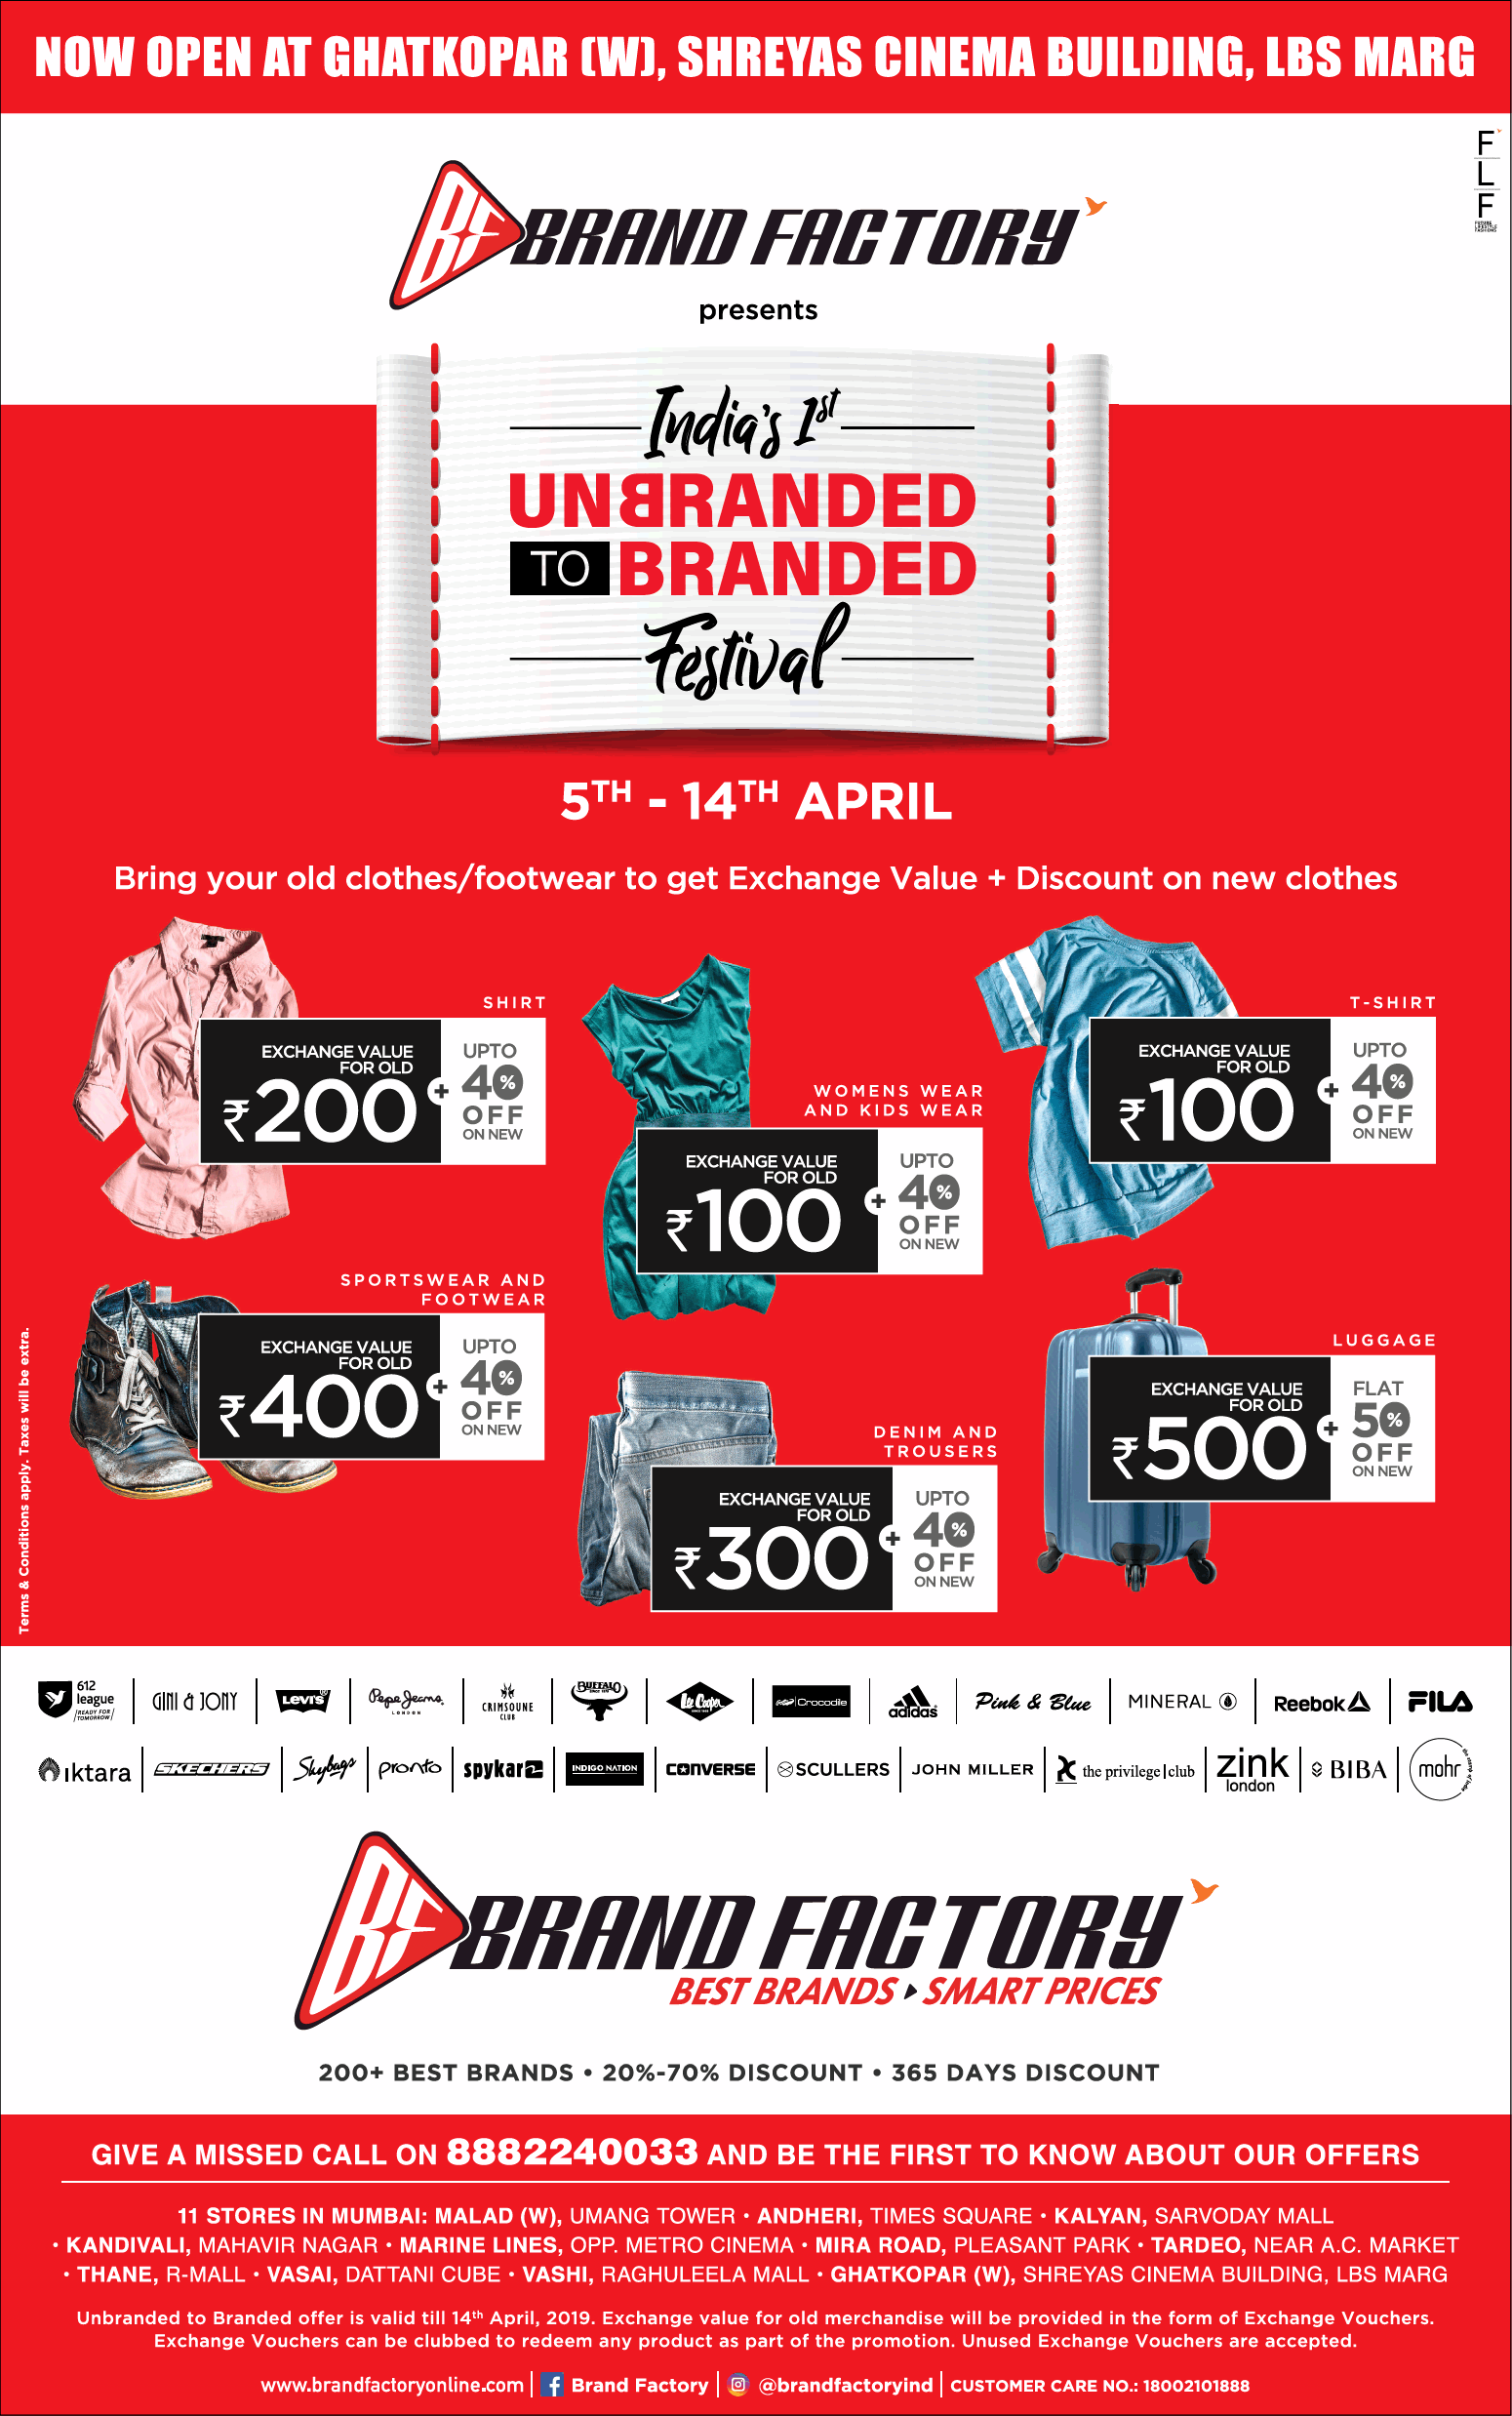 brand-factory-indias-no-1-unbranded-festival-ad-bombay-times-05-04-2019.png